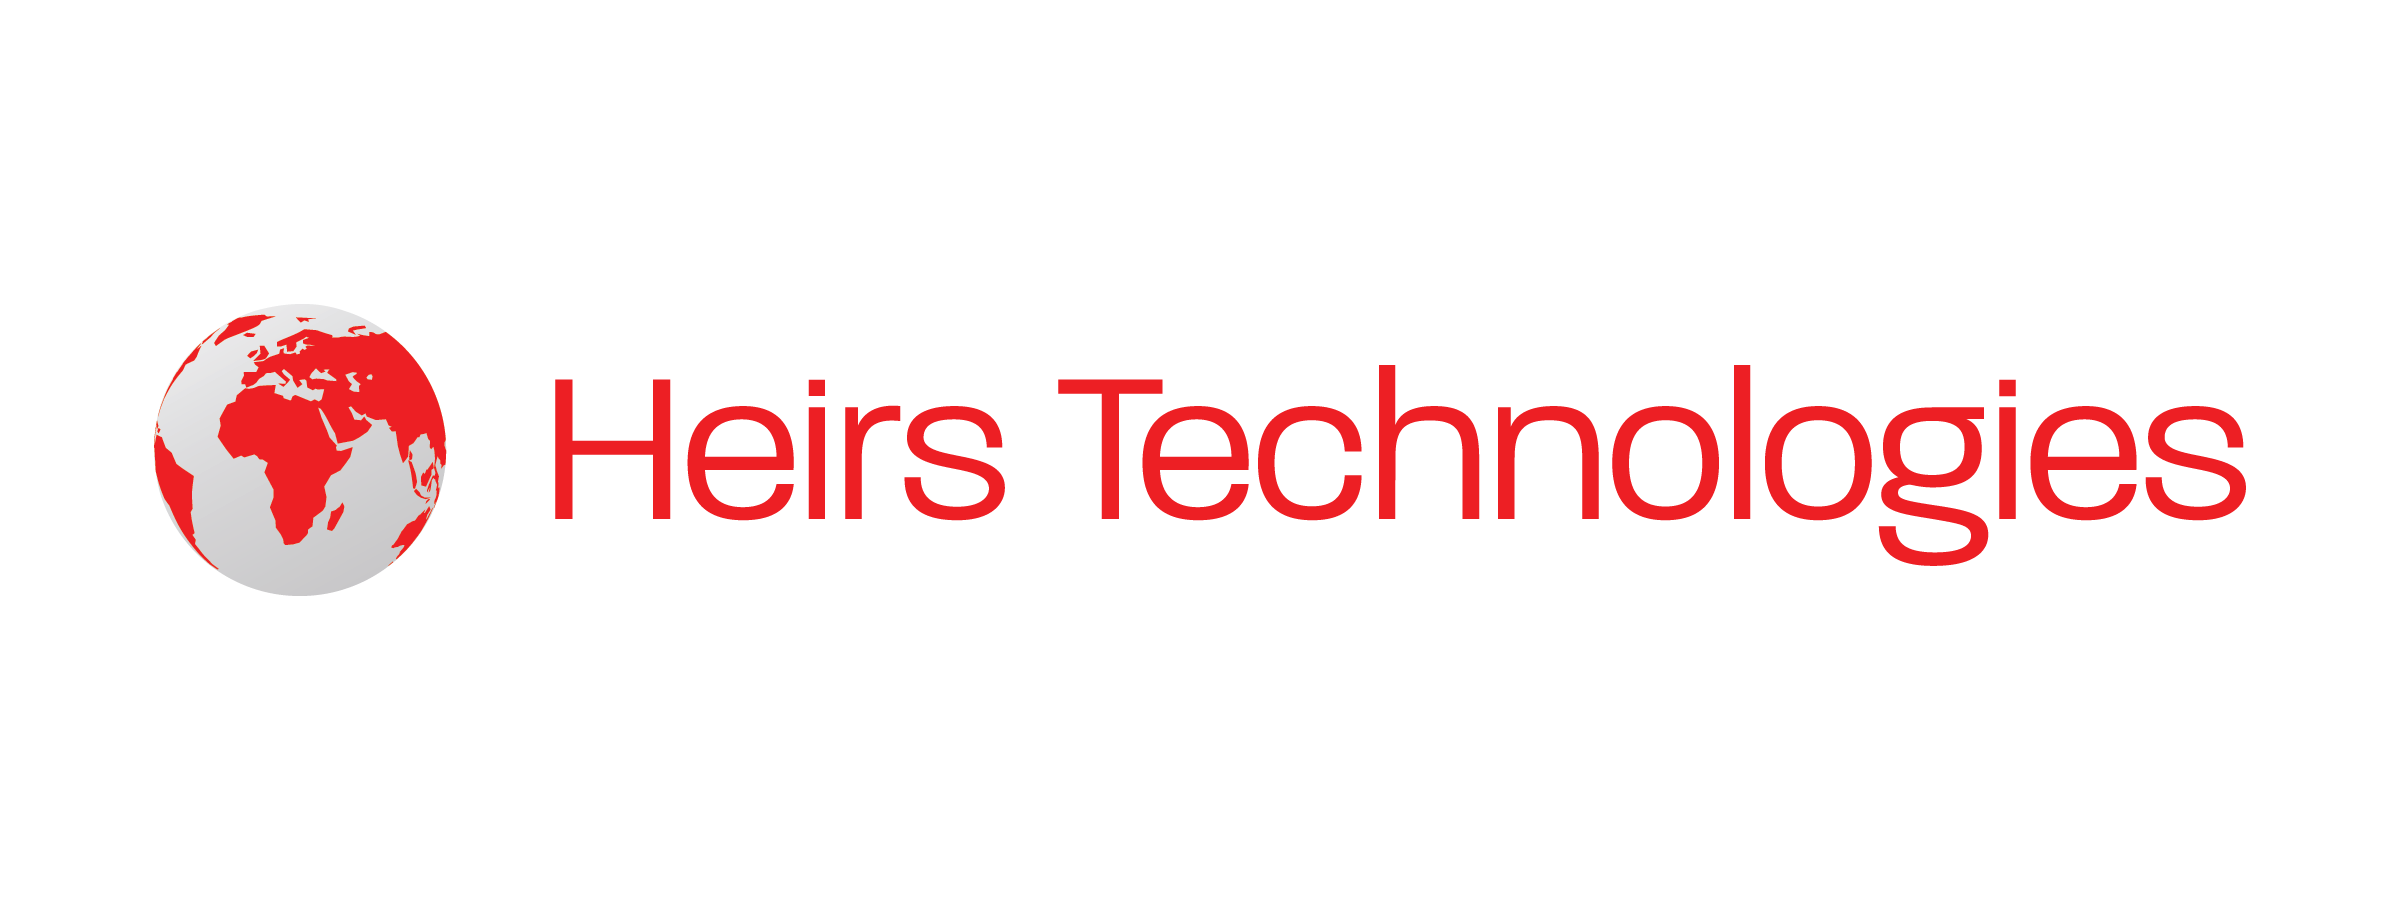 Heirs Holdings To Lead Africa’s Digital Evolution, Launches Heirs Technologies